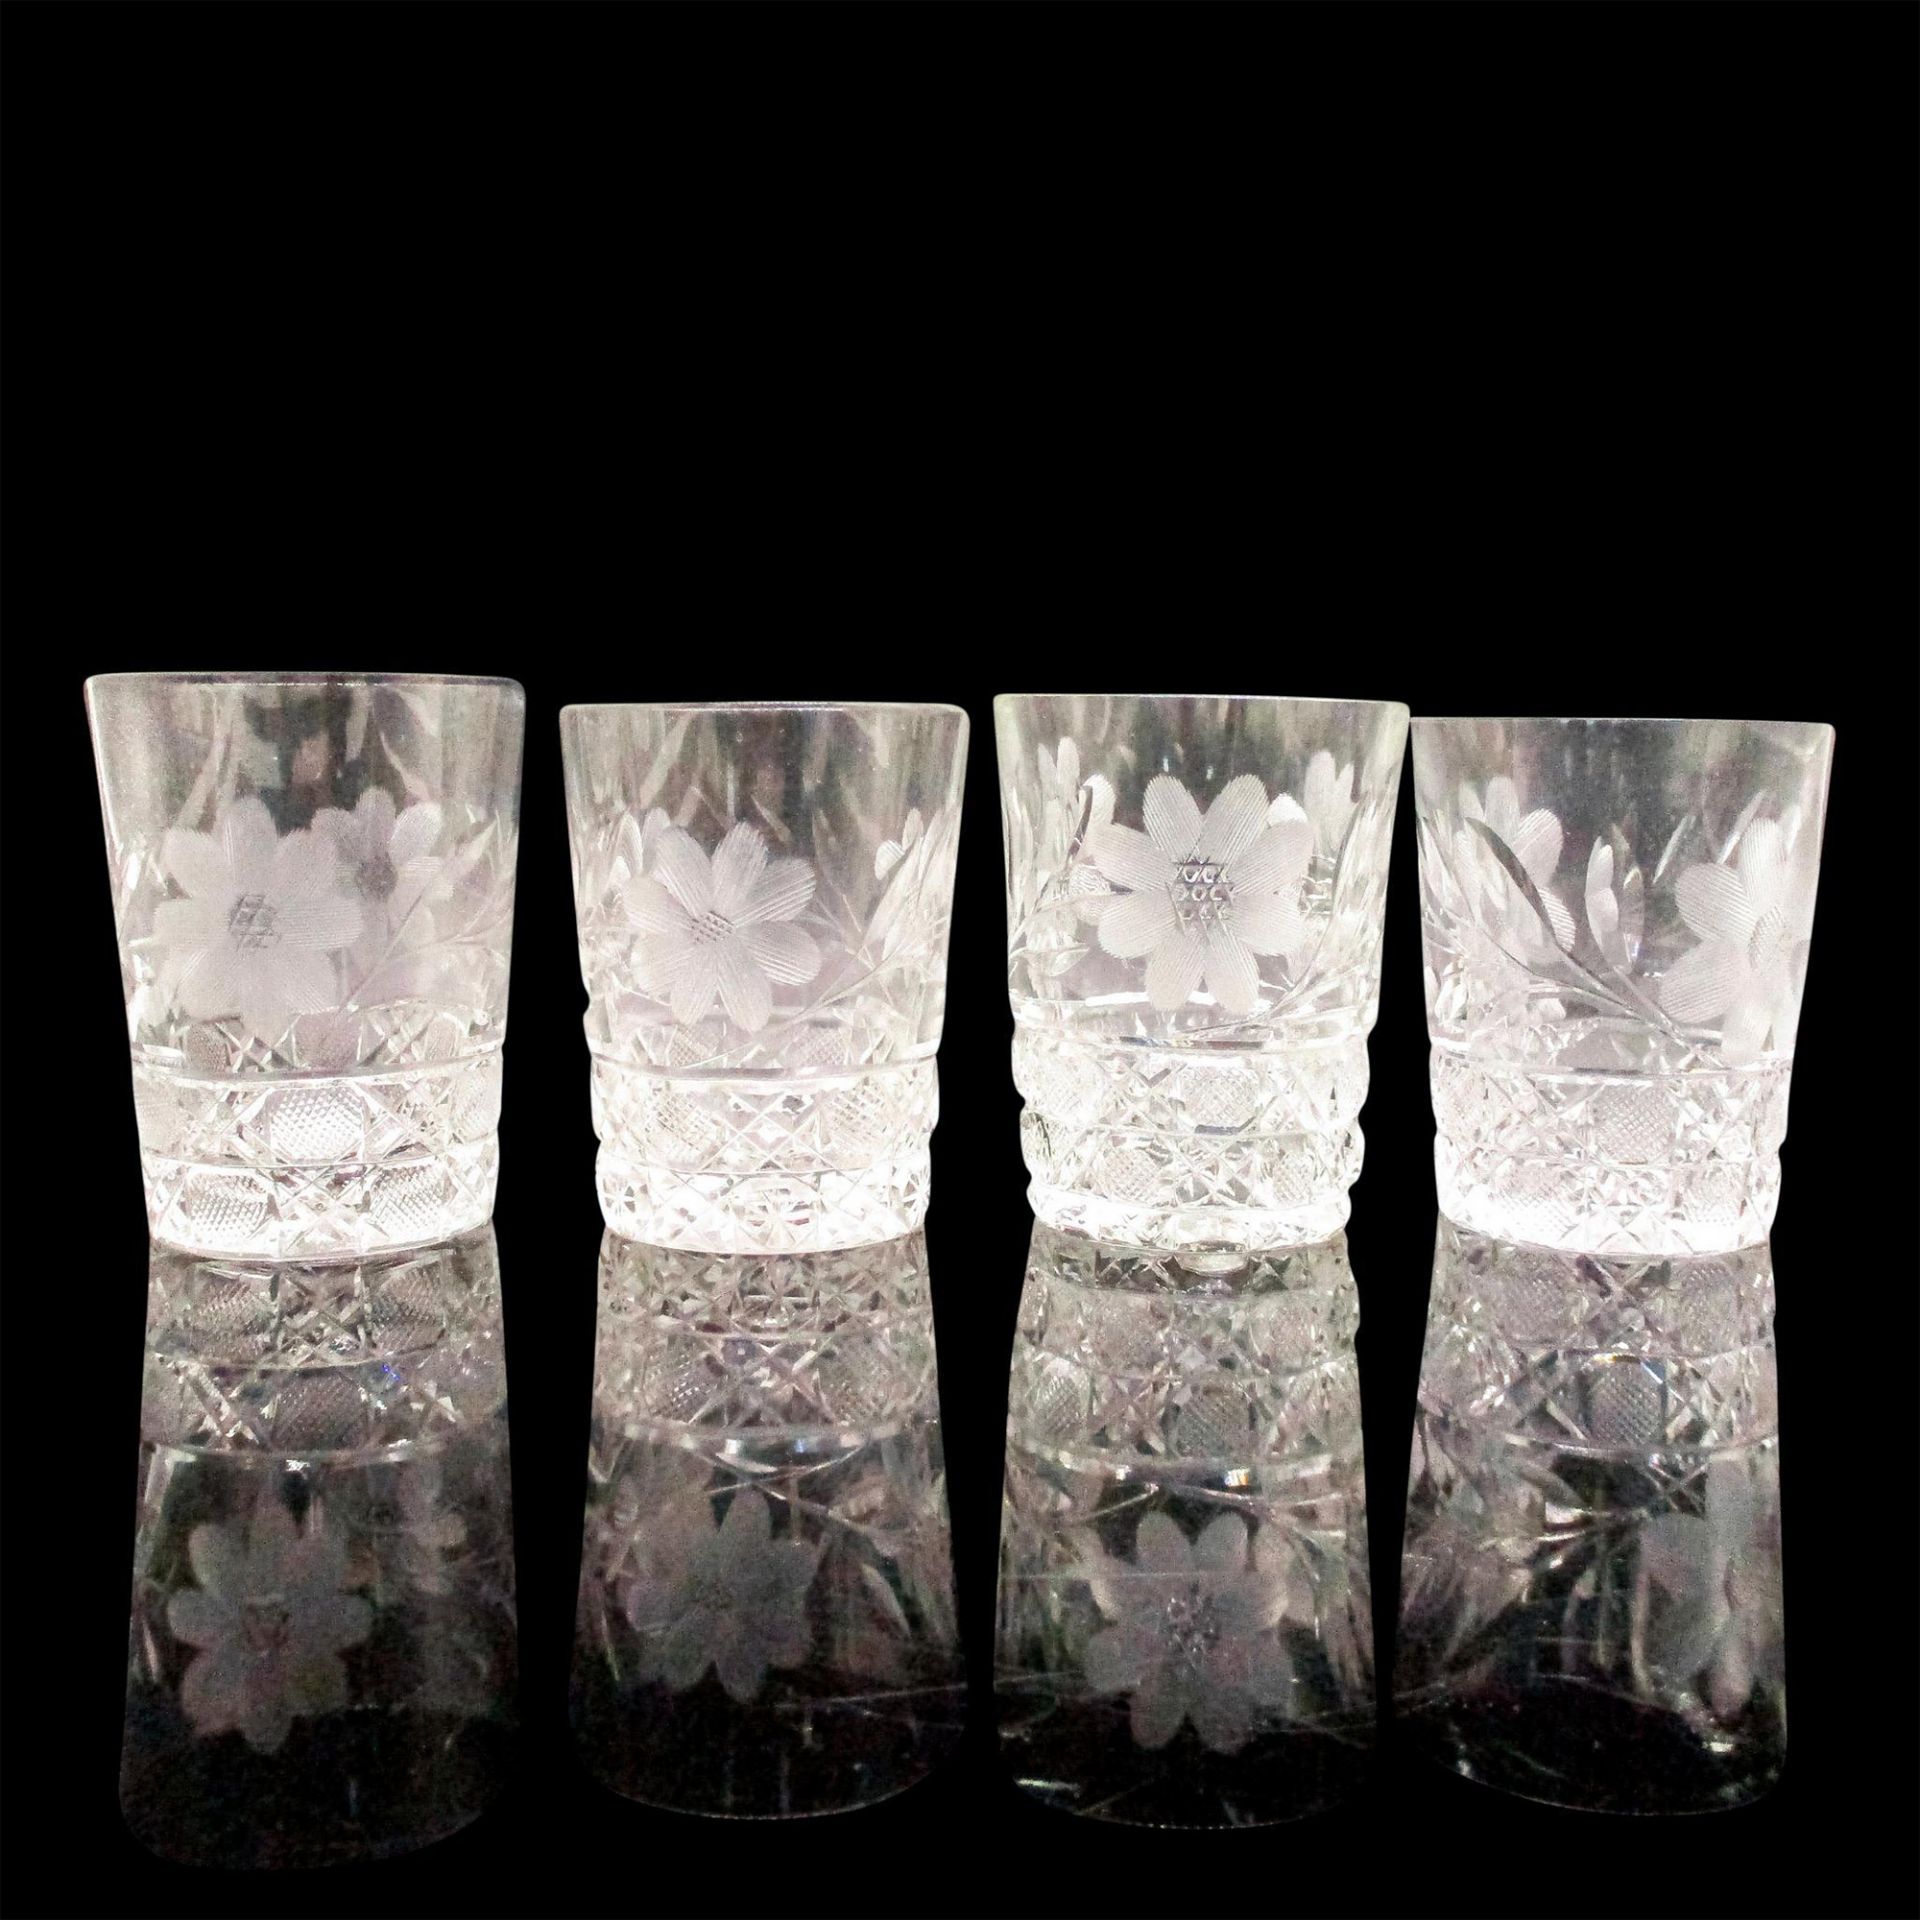 8pc Vintage Crystal Etched Whiskey Glasses - Image 7 of 8